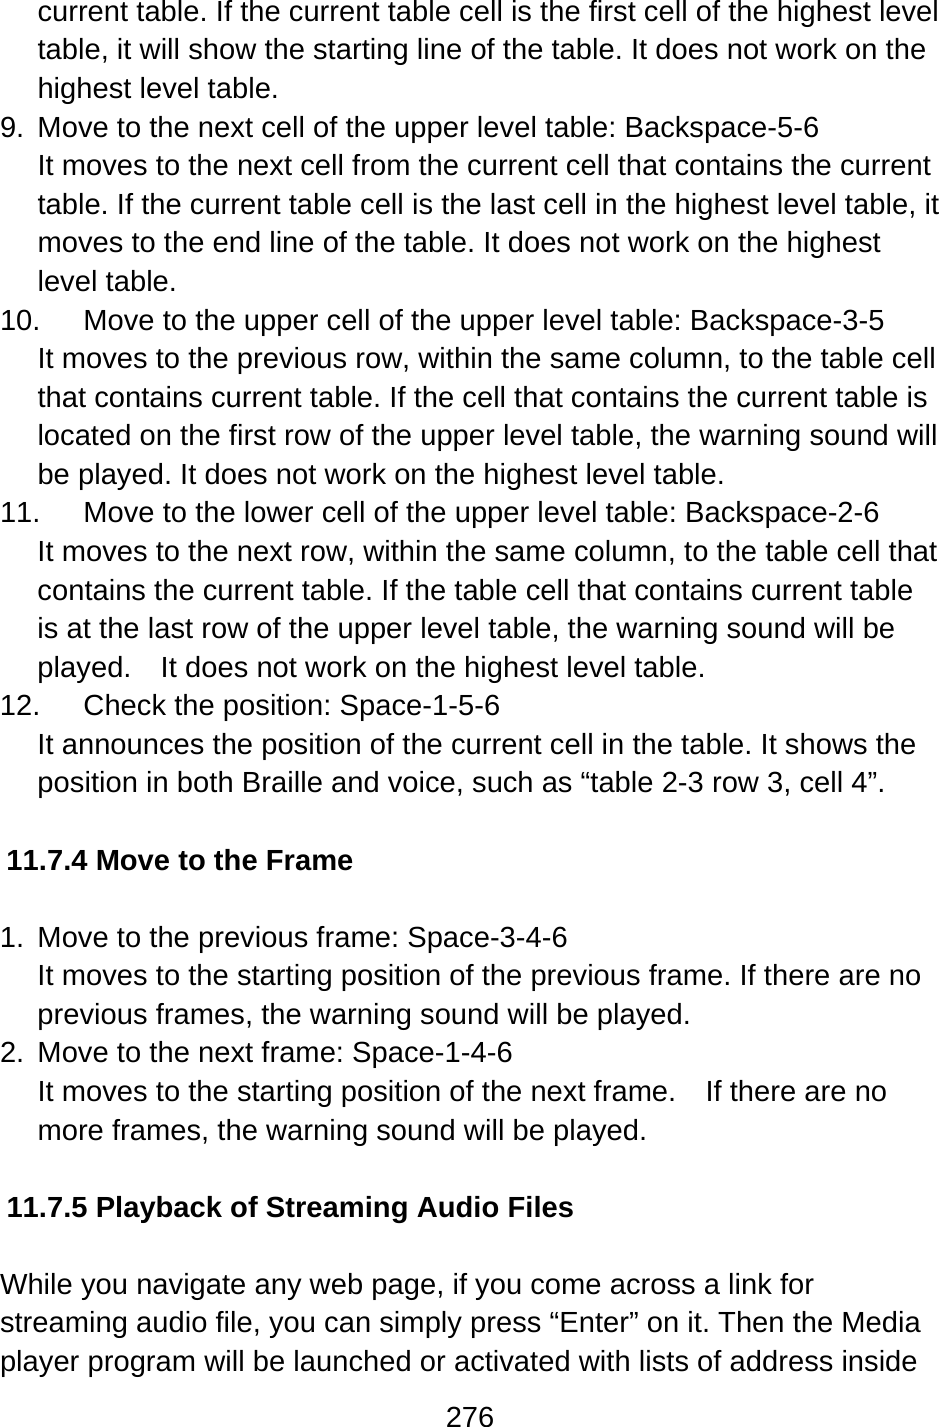 276  current table. If the current table cell is the first cell of the highest level table, it will show the starting line of the table. It does not work on the highest level table. 9.  Move to the next cell of the upper level table: Backspace-5-6 It moves to the next cell from the current cell that contains the current table. If the current table cell is the last cell in the highest level table, it moves to the end line of the table. It does not work on the highest level table. 10.  Move to the upper cell of the upper level table: Backspace-3-5 It moves to the previous row, within the same column, to the table cell that contains current table. If the cell that contains the current table is located on the first row of the upper level table, the warning sound will be played. It does not work on the highest level table. 11.  Move to the lower cell of the upper level table: Backspace-2-6 It moves to the next row, within the same column, to the table cell that contains the current table. If the table cell that contains current table is at the last row of the upper level table, the warning sound will be played.    It does not work on the highest level table. 12.  Check the position: Space-1-5-6 It announces the position of the current cell in the table. It shows the position in both Braille and voice, such as “table 2-3 row 3, cell 4”.  11.7.4 Move to the Frame  1.  Move to the previous frame: Space-3-4-6 It moves to the starting position of the previous frame. If there are no previous frames, the warning sound will be played. 2.  Move to the next frame: Space-1-4-6 It moves to the starting position of the next frame.    If there are no more frames, the warning sound will be played.  11.7.5 Playback of Streaming Audio Files  While you navigate any web page, if you come across a link for streaming audio file, you can simply press “Enter” on it. Then the Media player program will be launched or activated with lists of address inside 